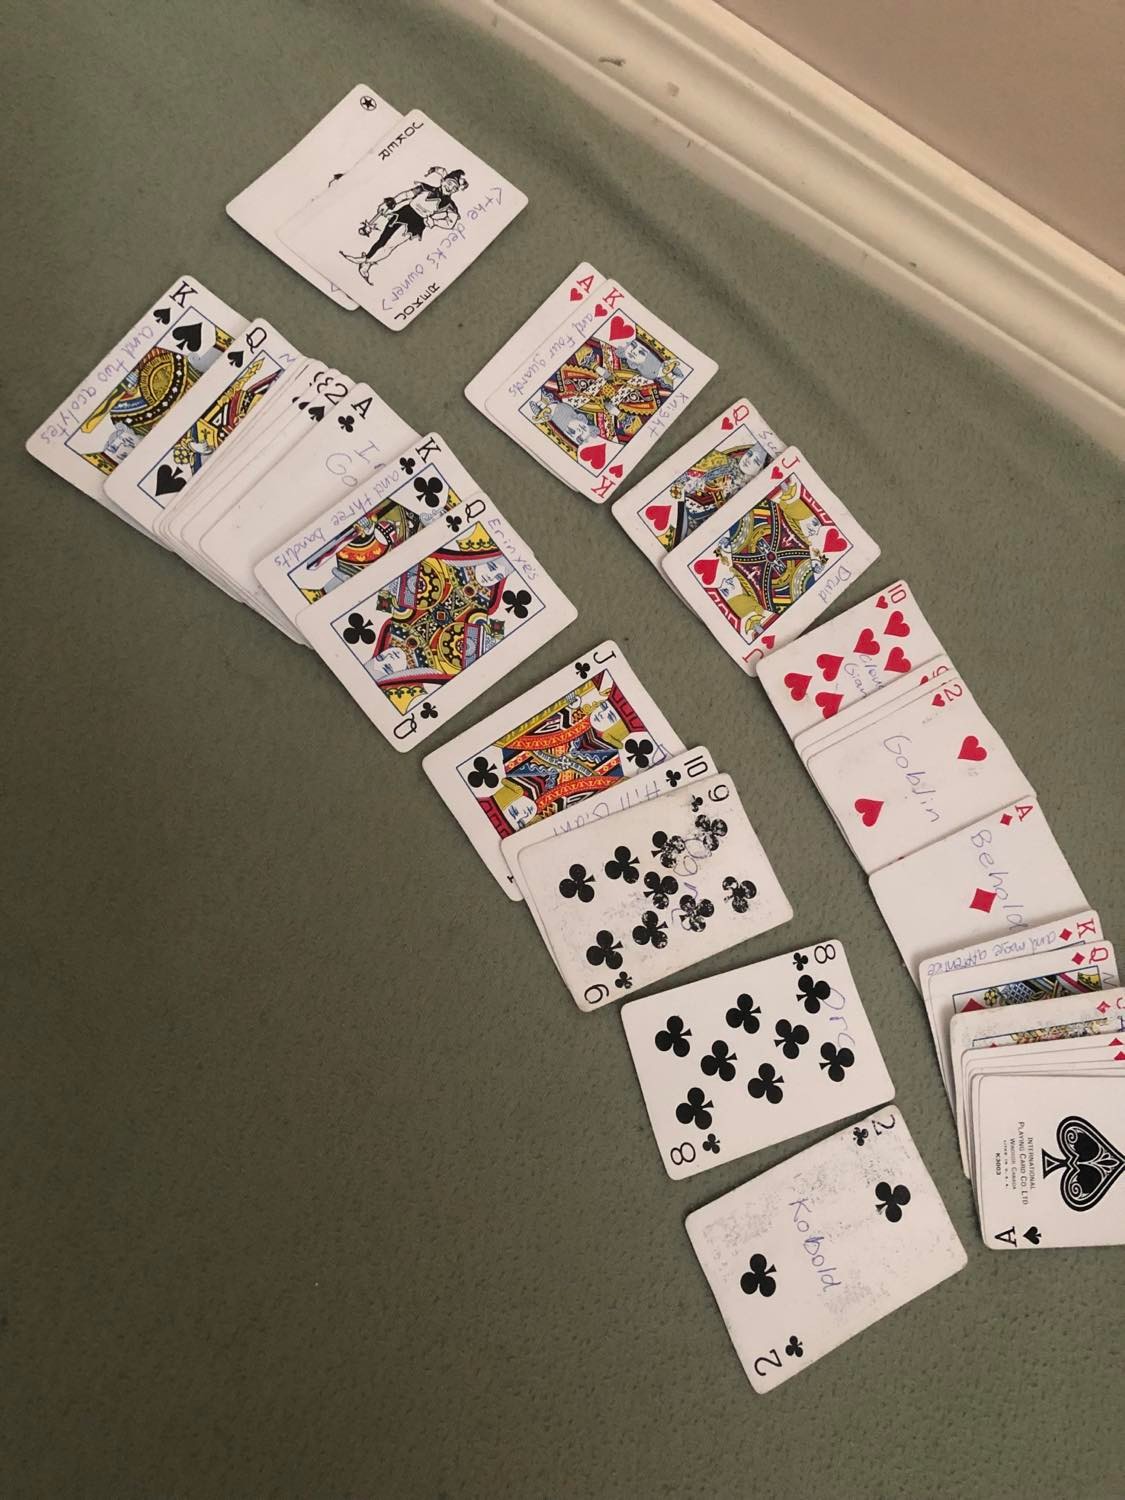 A deck of illusions, showing the available cards remaining.